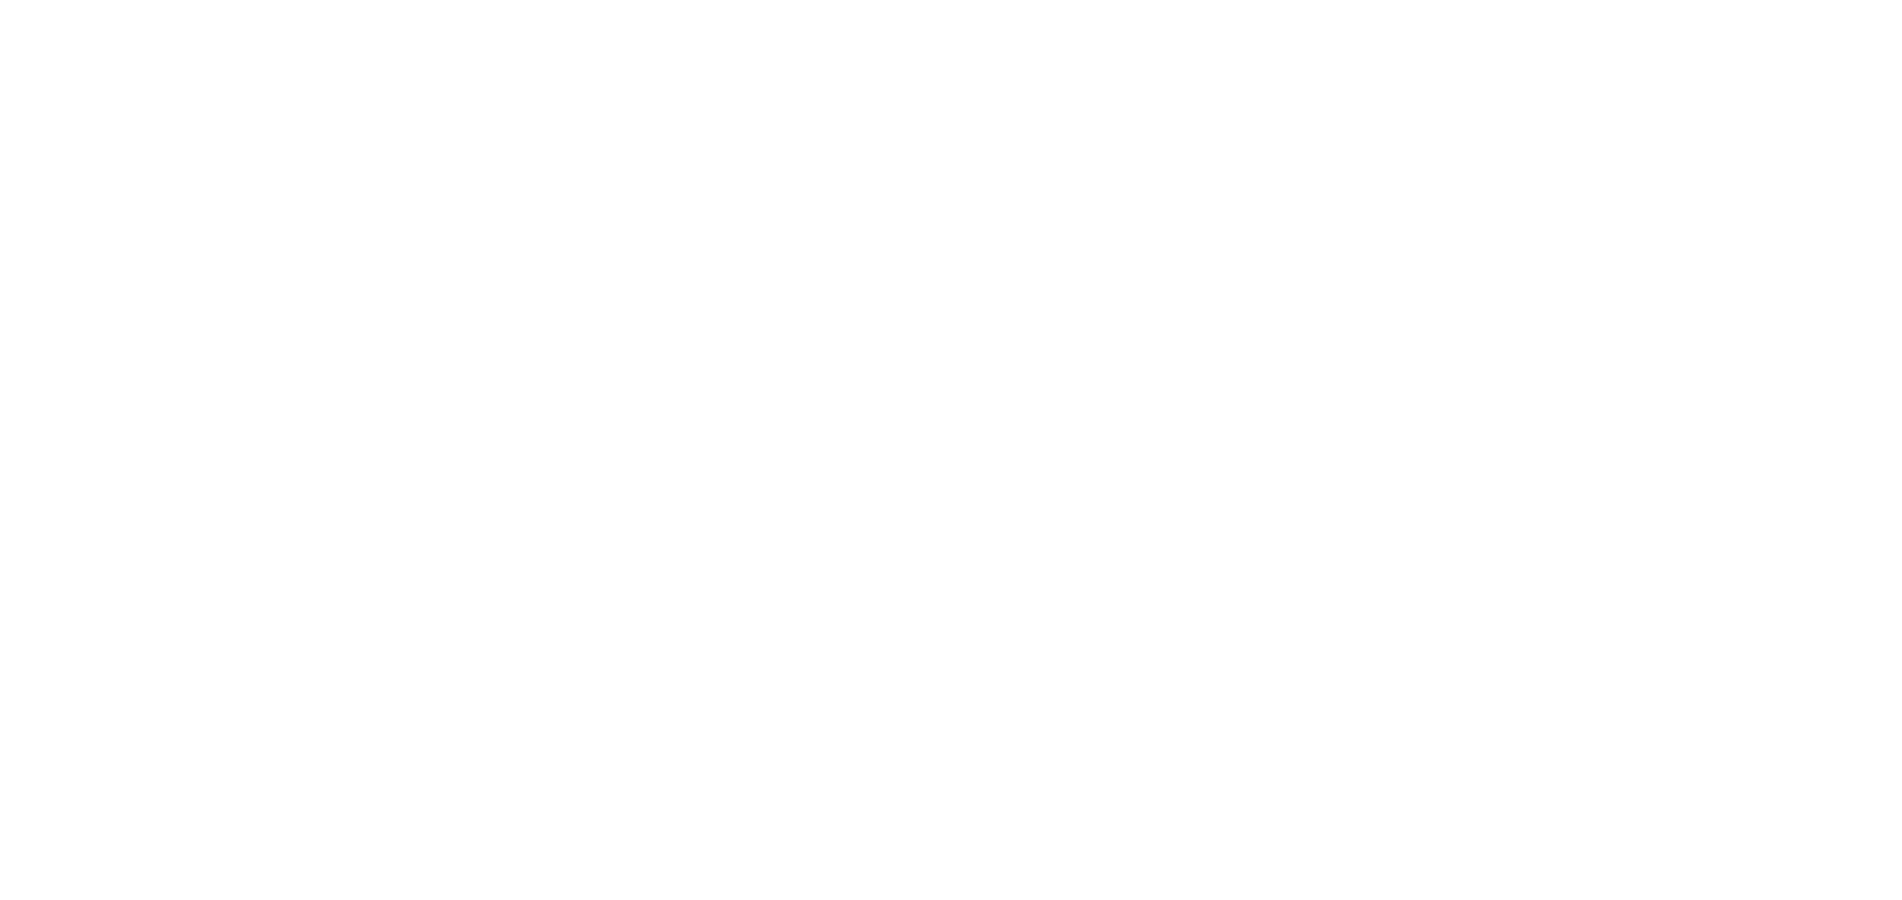 Better Fit Bedding - The Future of Bedding